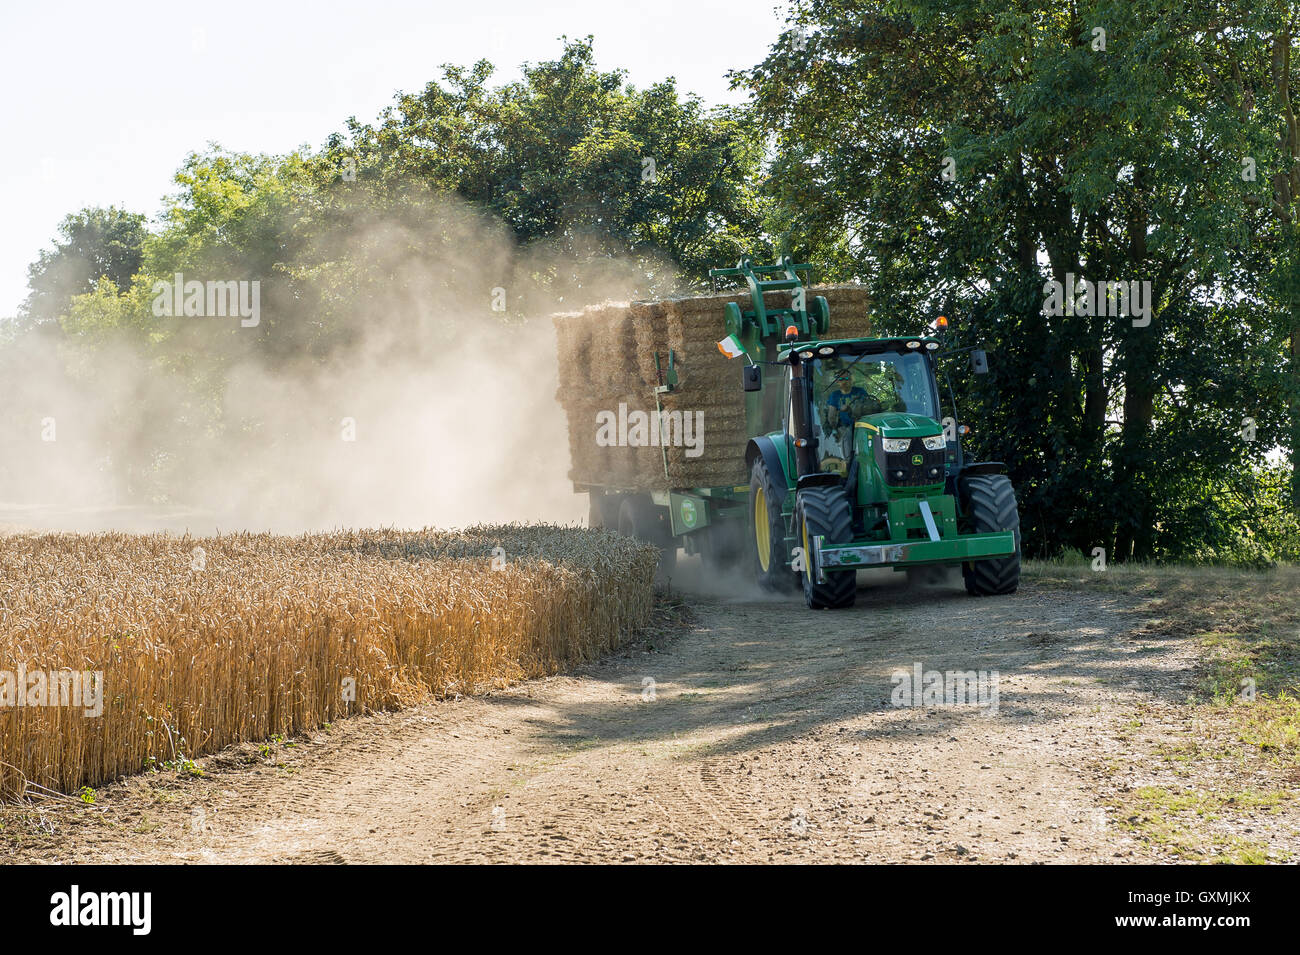 Tractor with trailer of bales Stock Photo